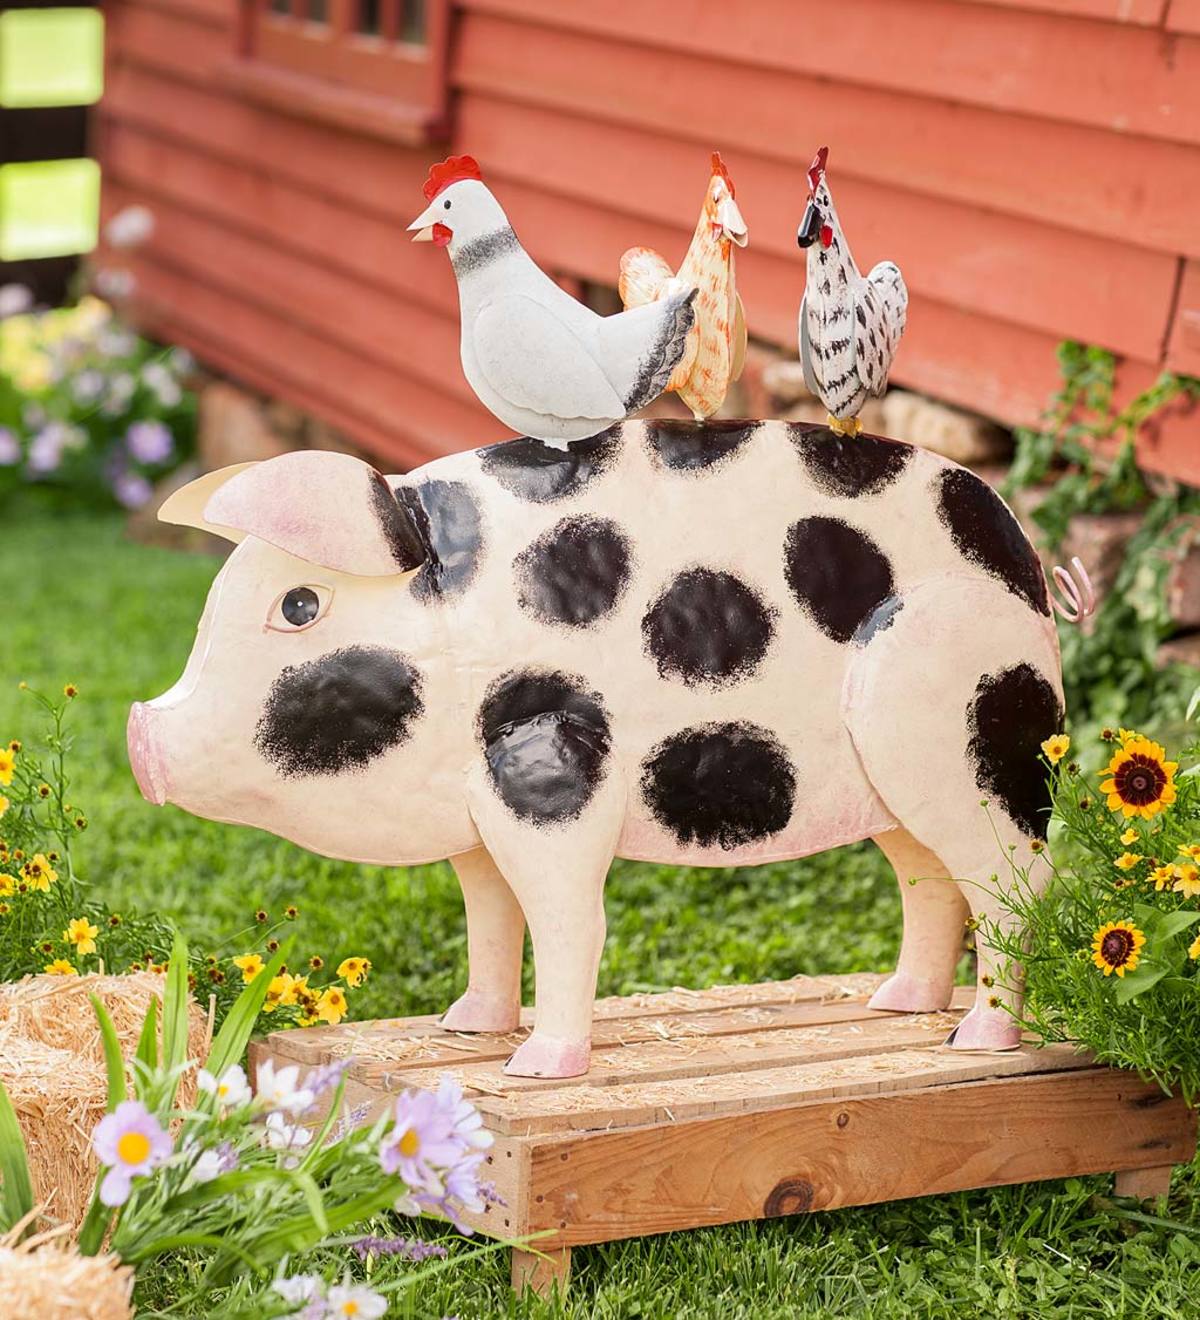 Handcrafted Metal Pig with Chickens Sculpture